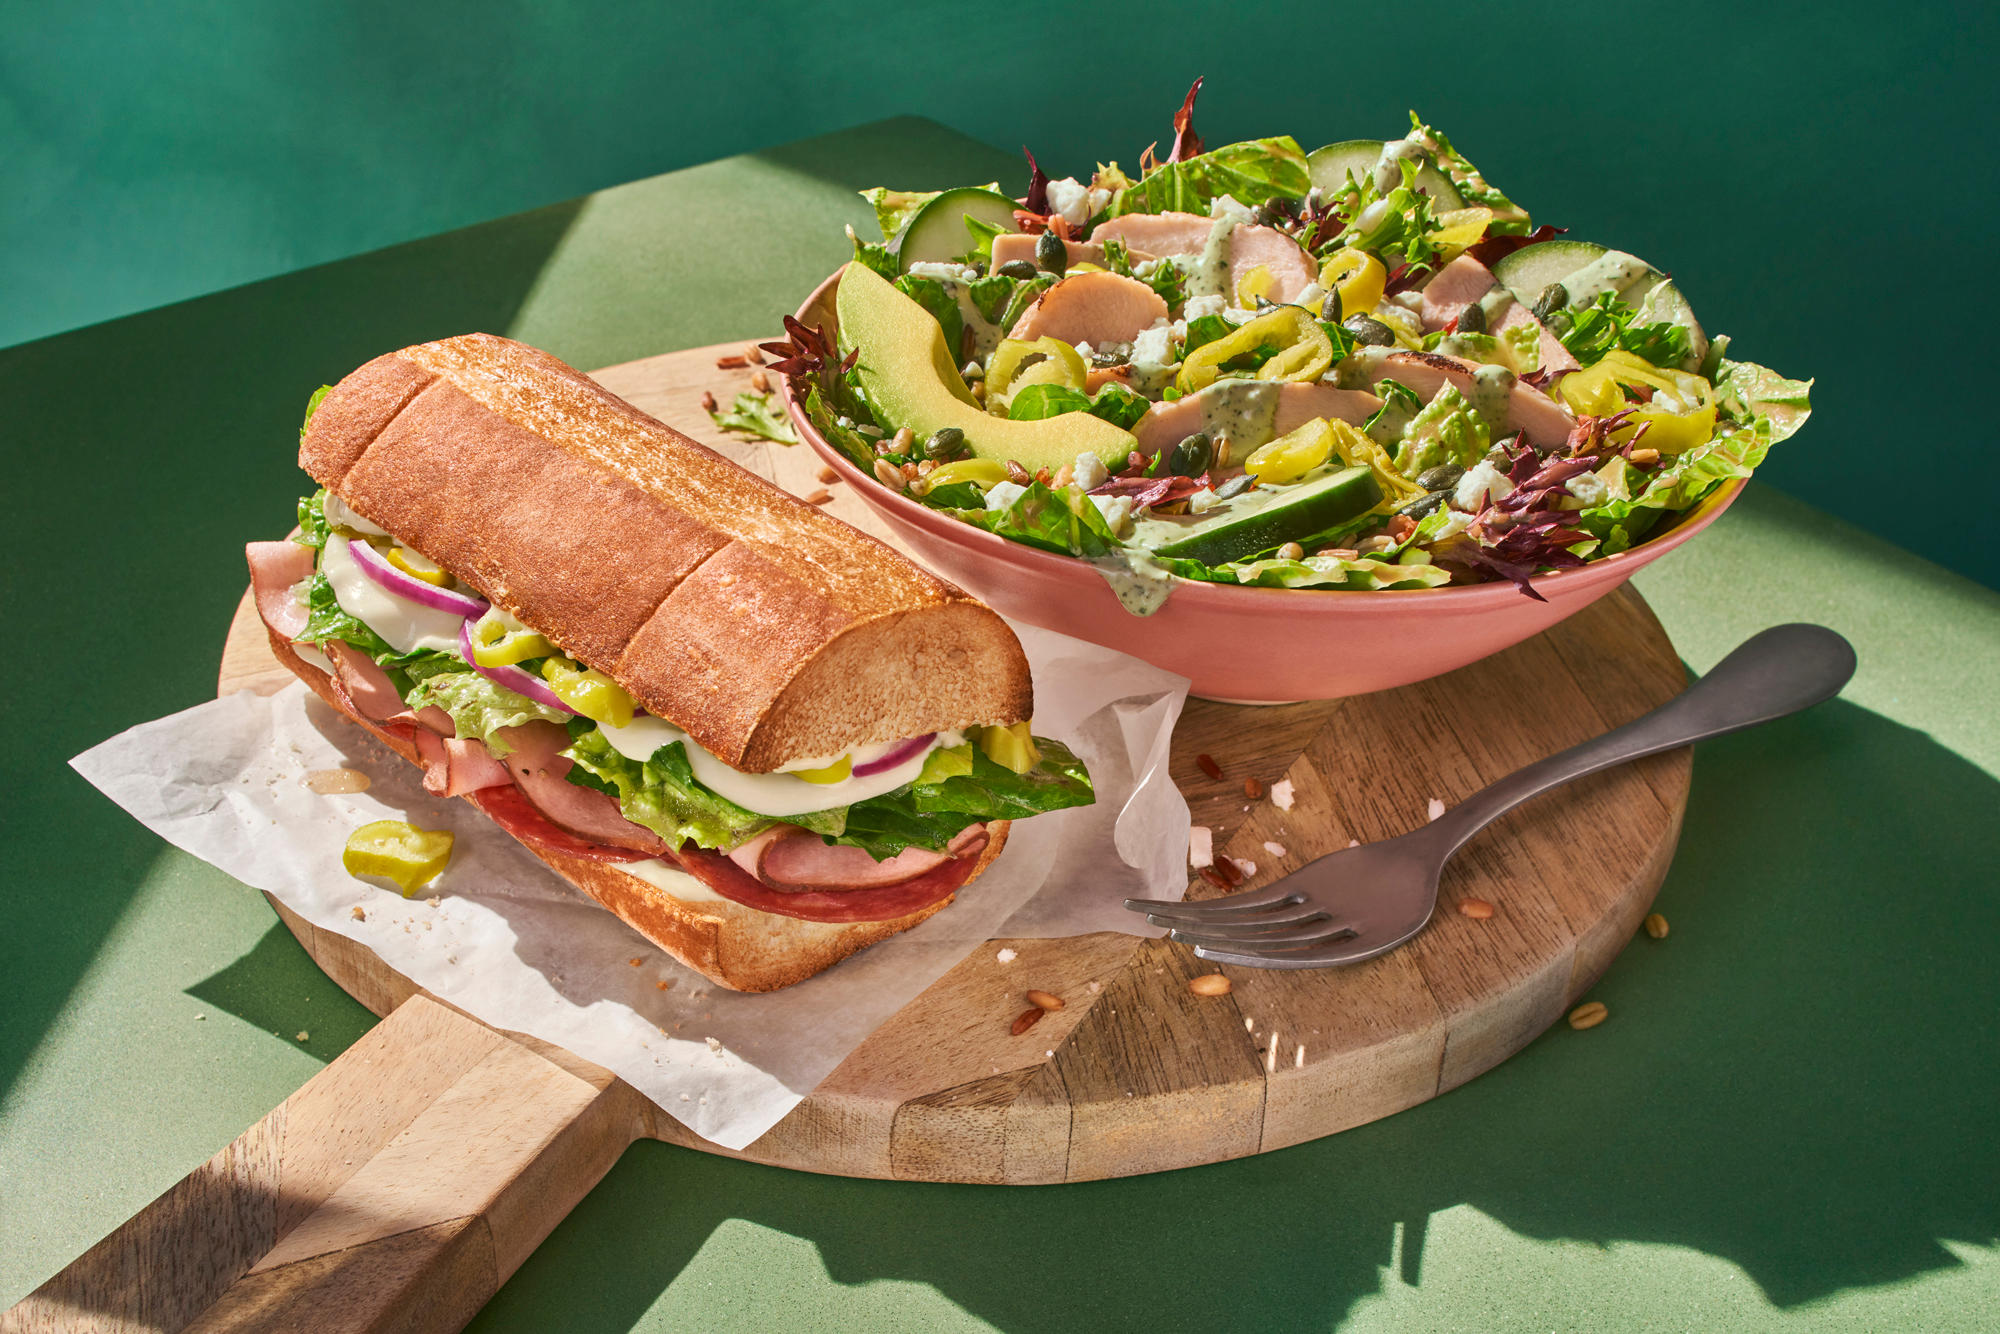 Toasted Italiano & Balsamic Chicken Greens with Grains You Pick 2 Panera Bread Glendale (623)412-3044